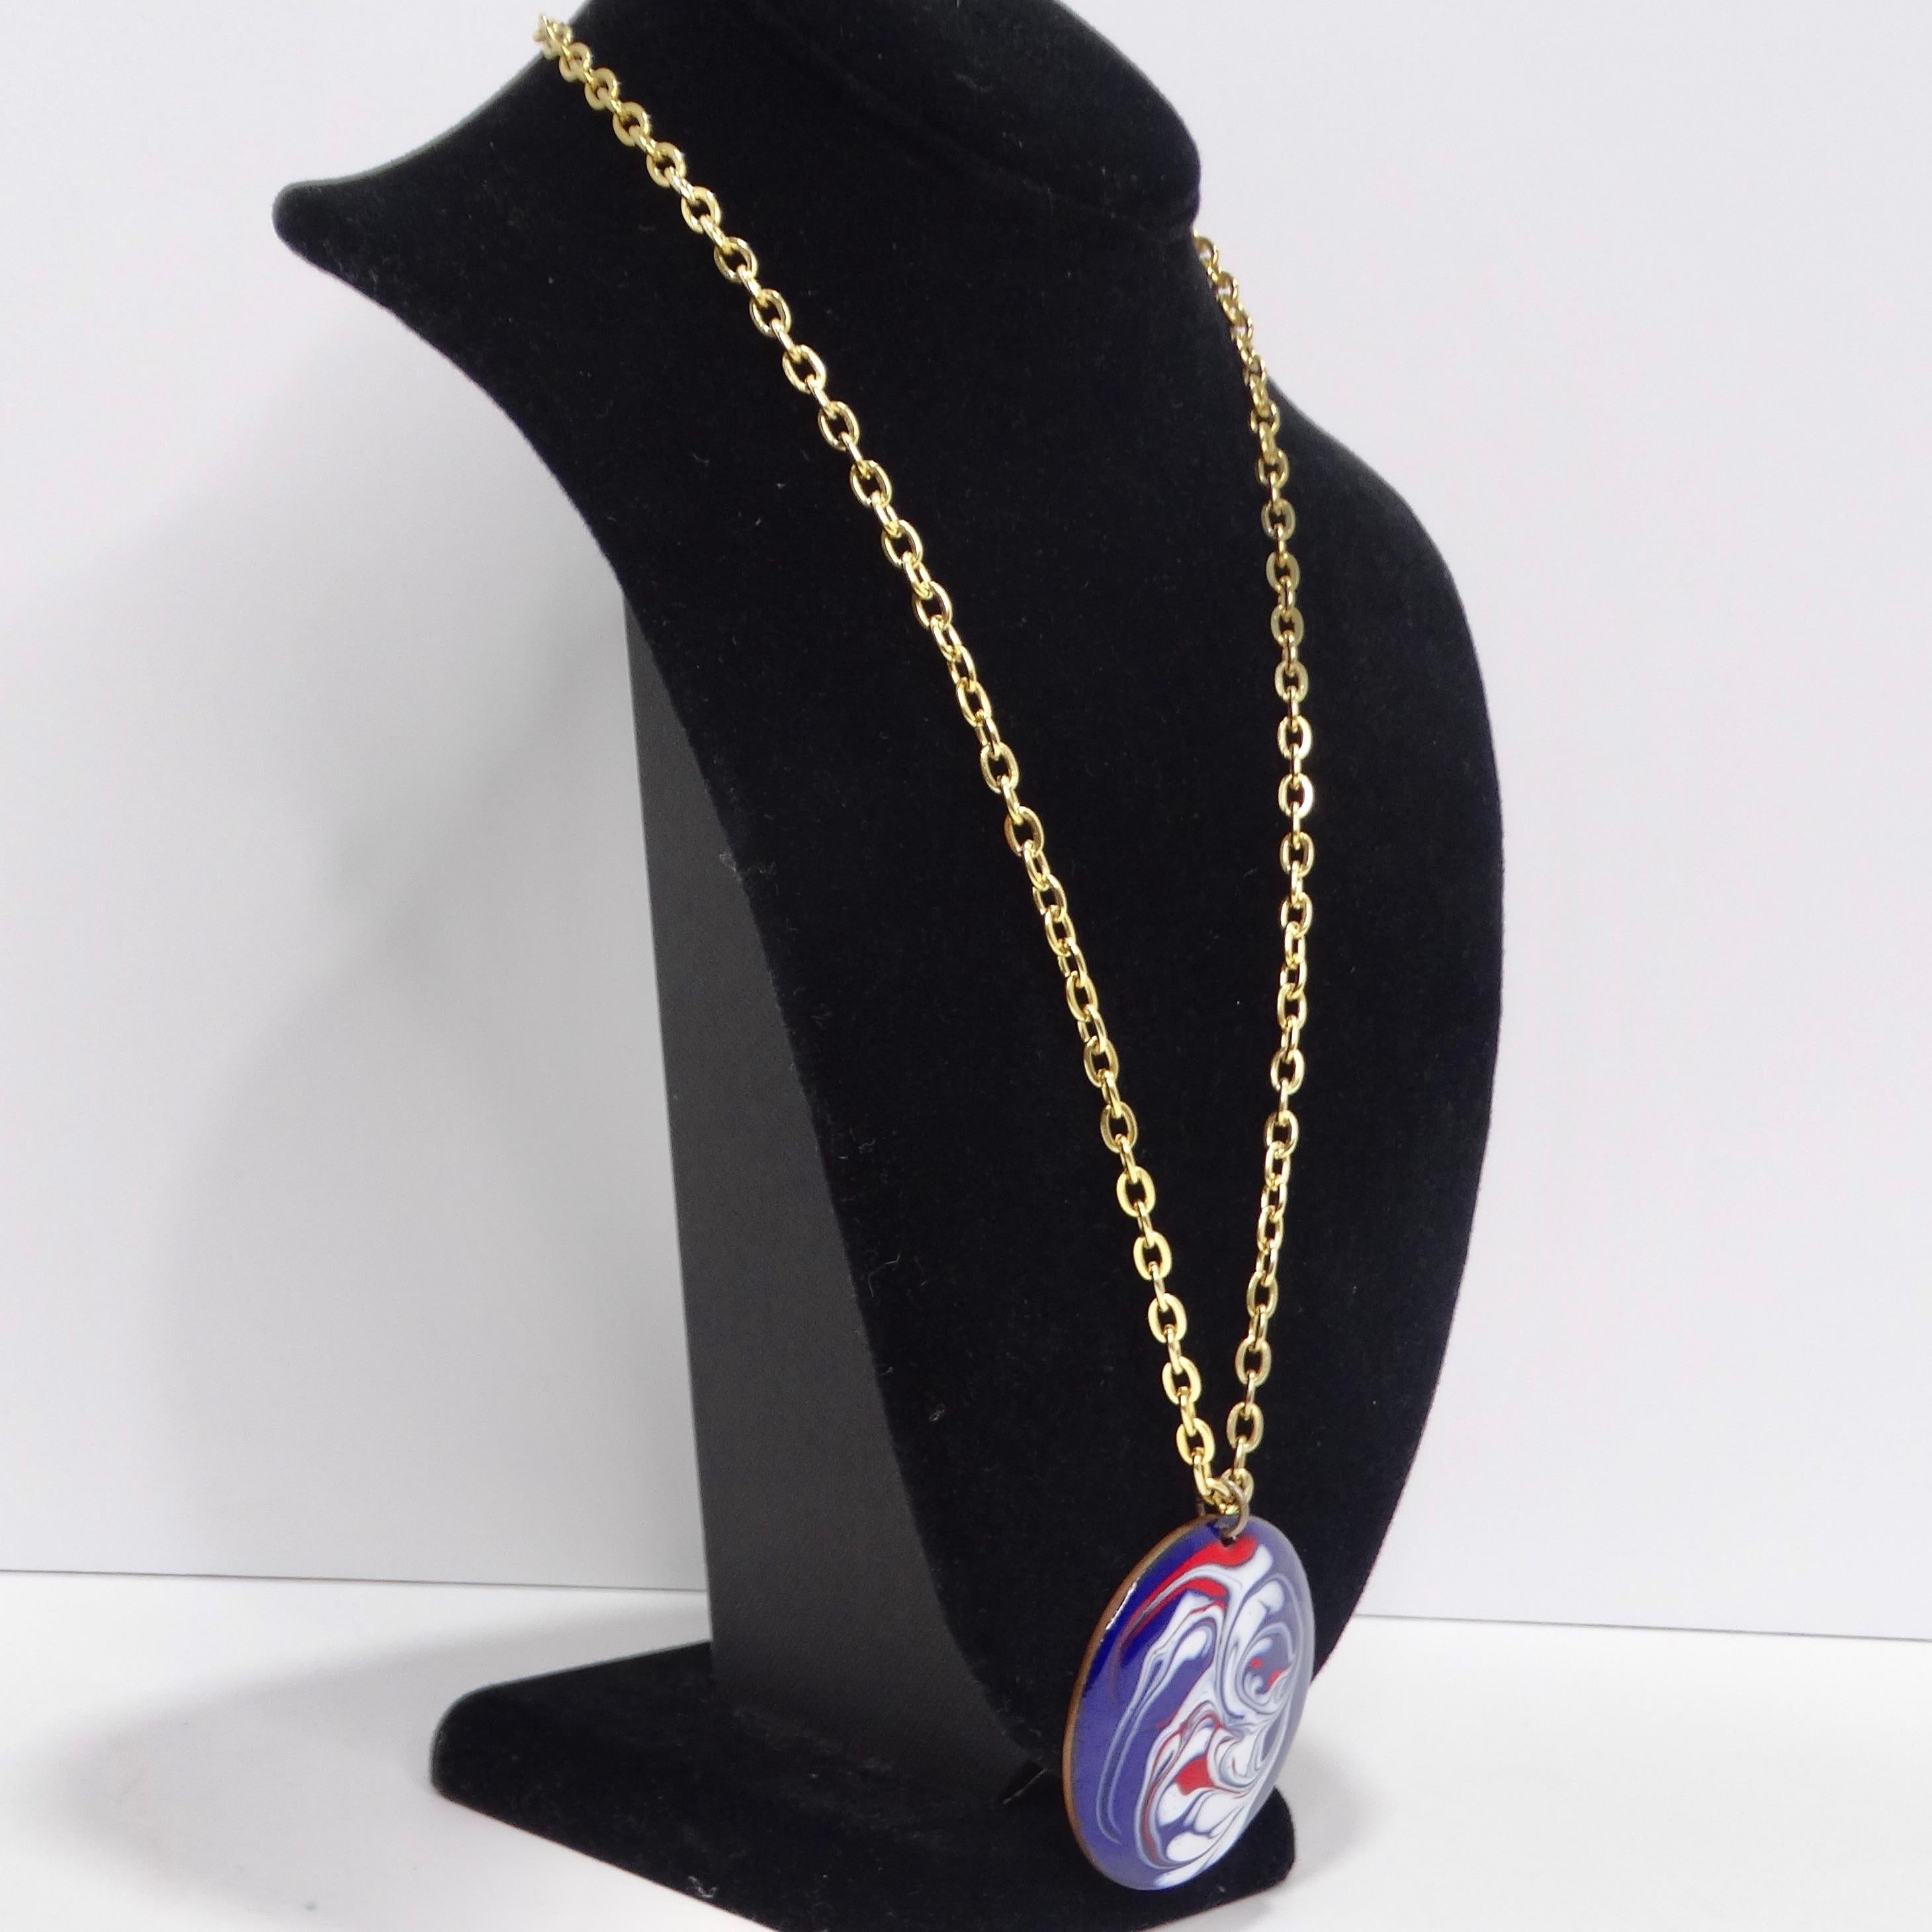 Embrace vintage charm with this 1980s 18K Gold-Plated Blue Marble Pendant Necklace. This classic gold-tone chain necklace showcases a bold circular pendant with a captivating red, white, and blue marble effect. A true statement piece from the 80s,